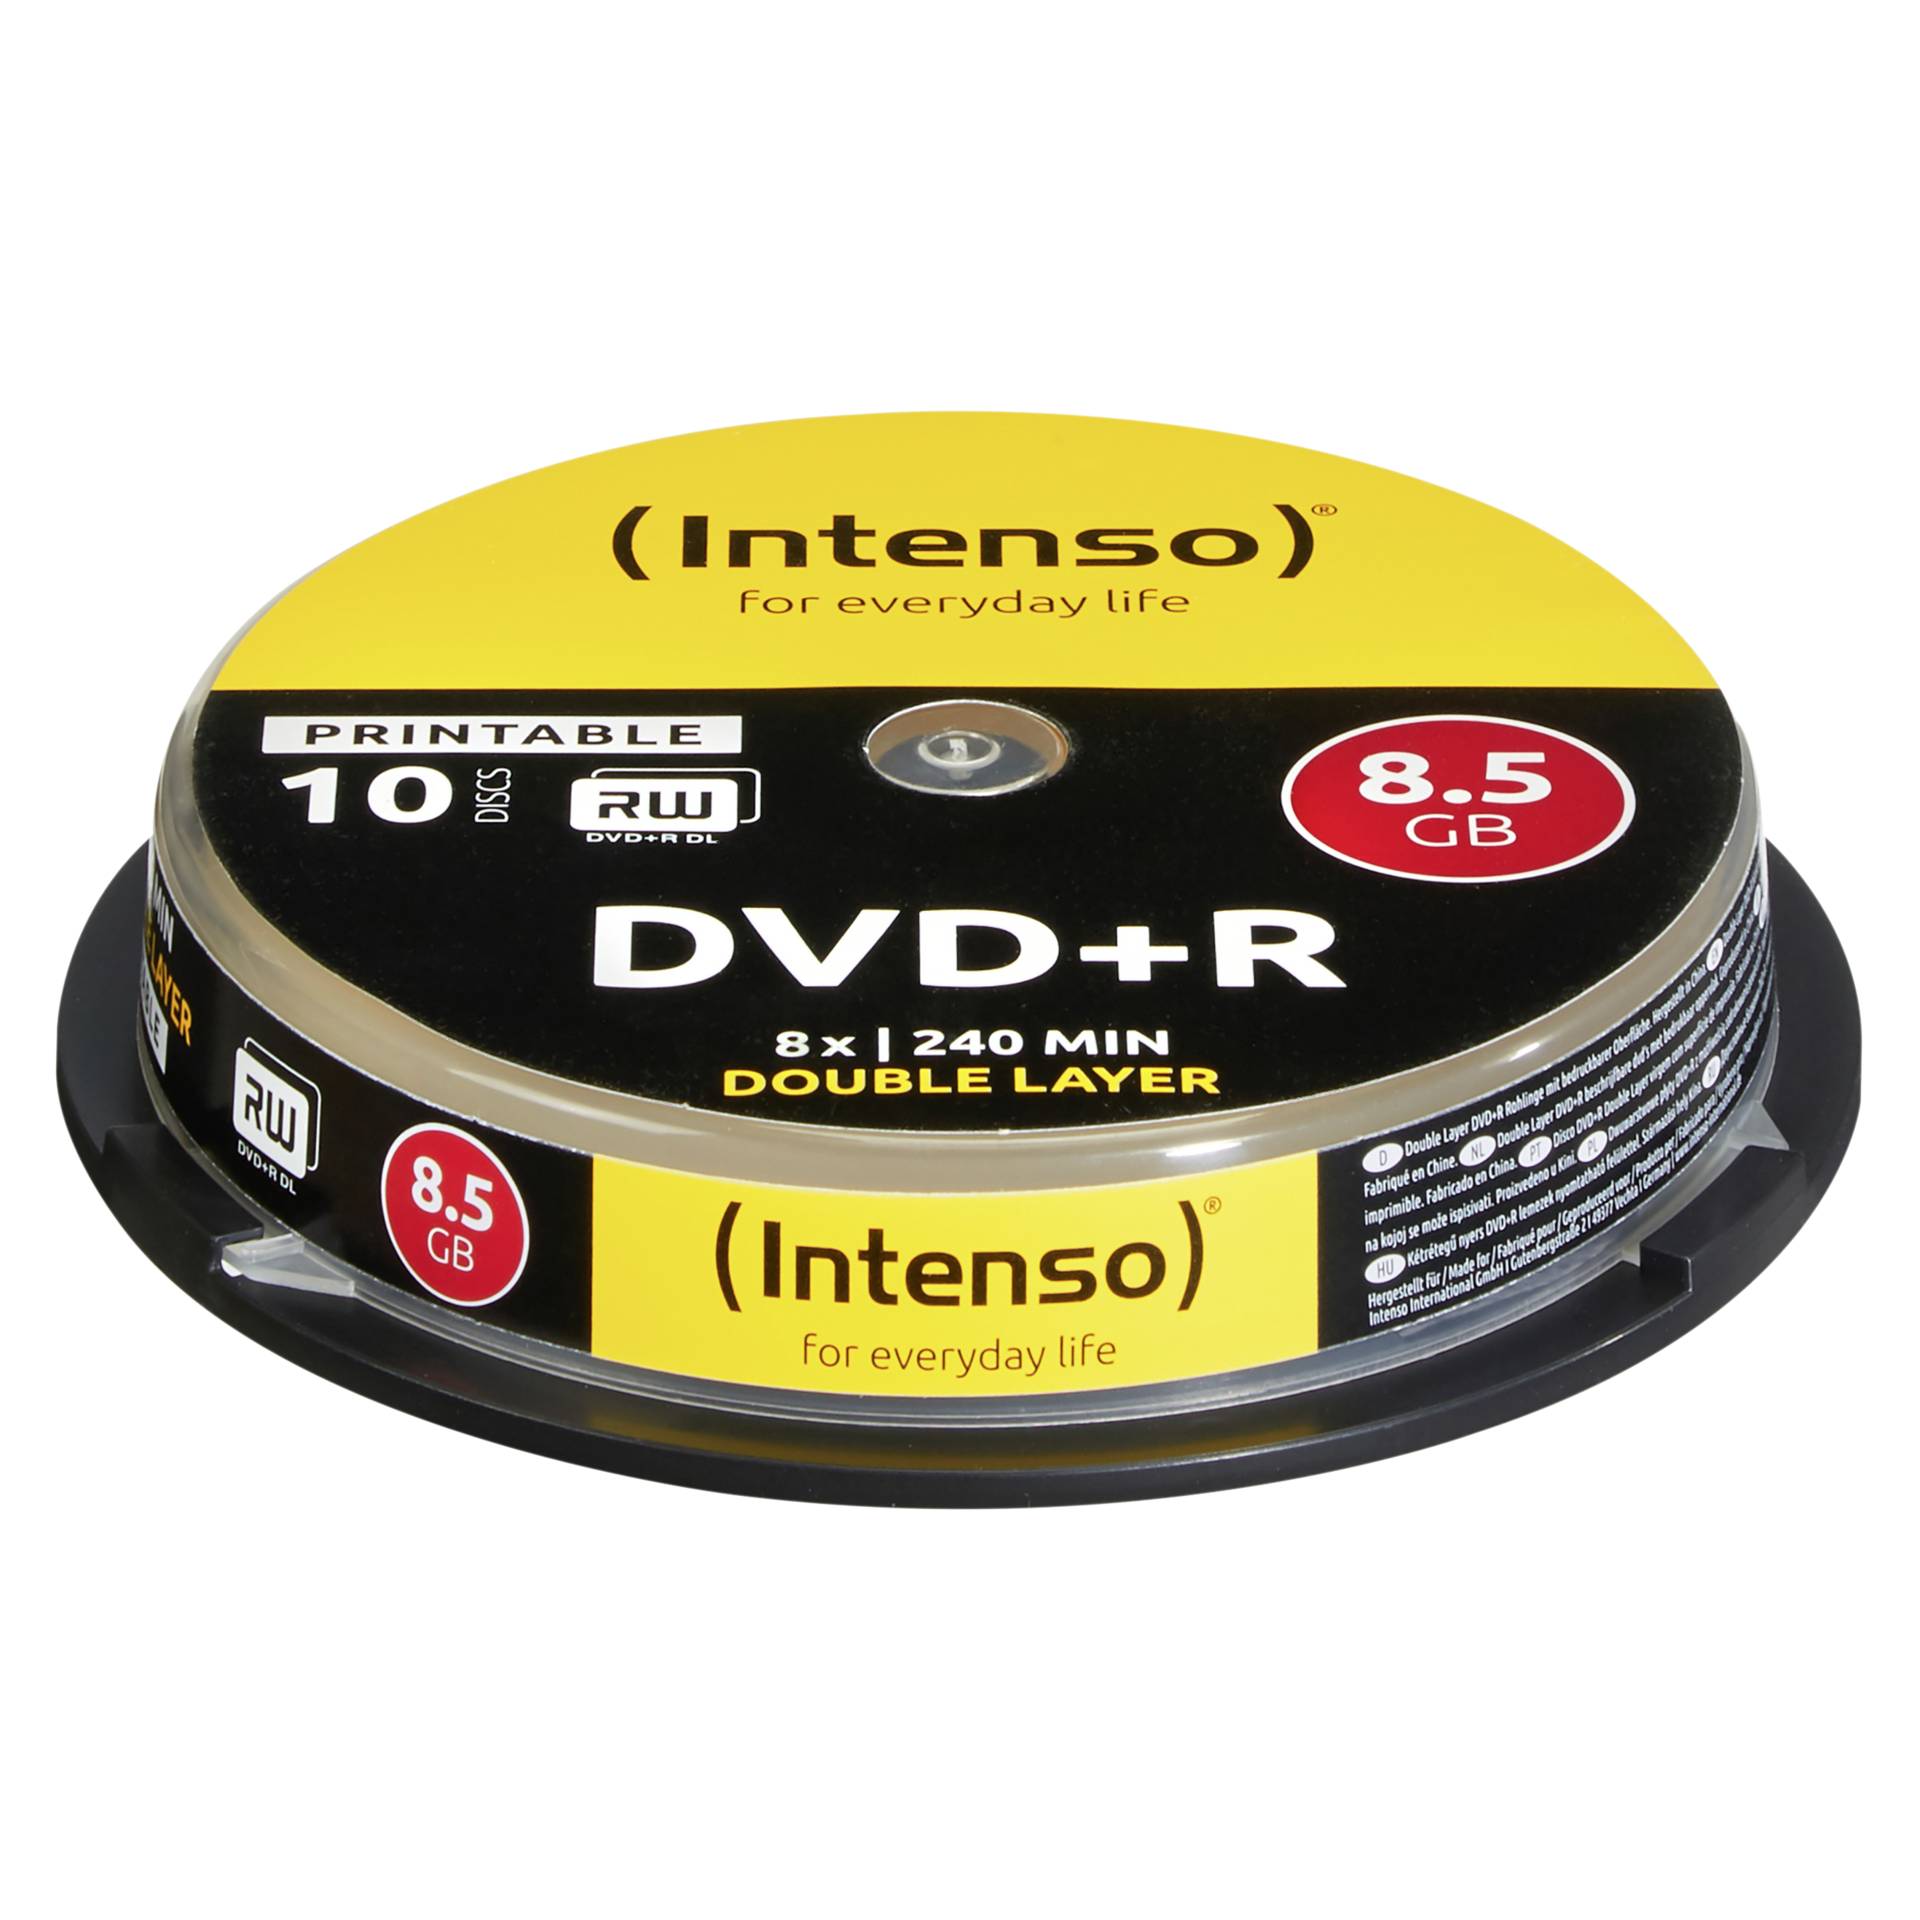 1x10 Intenso DVD+R 8,5GB 8x Speed, Double Layer printable